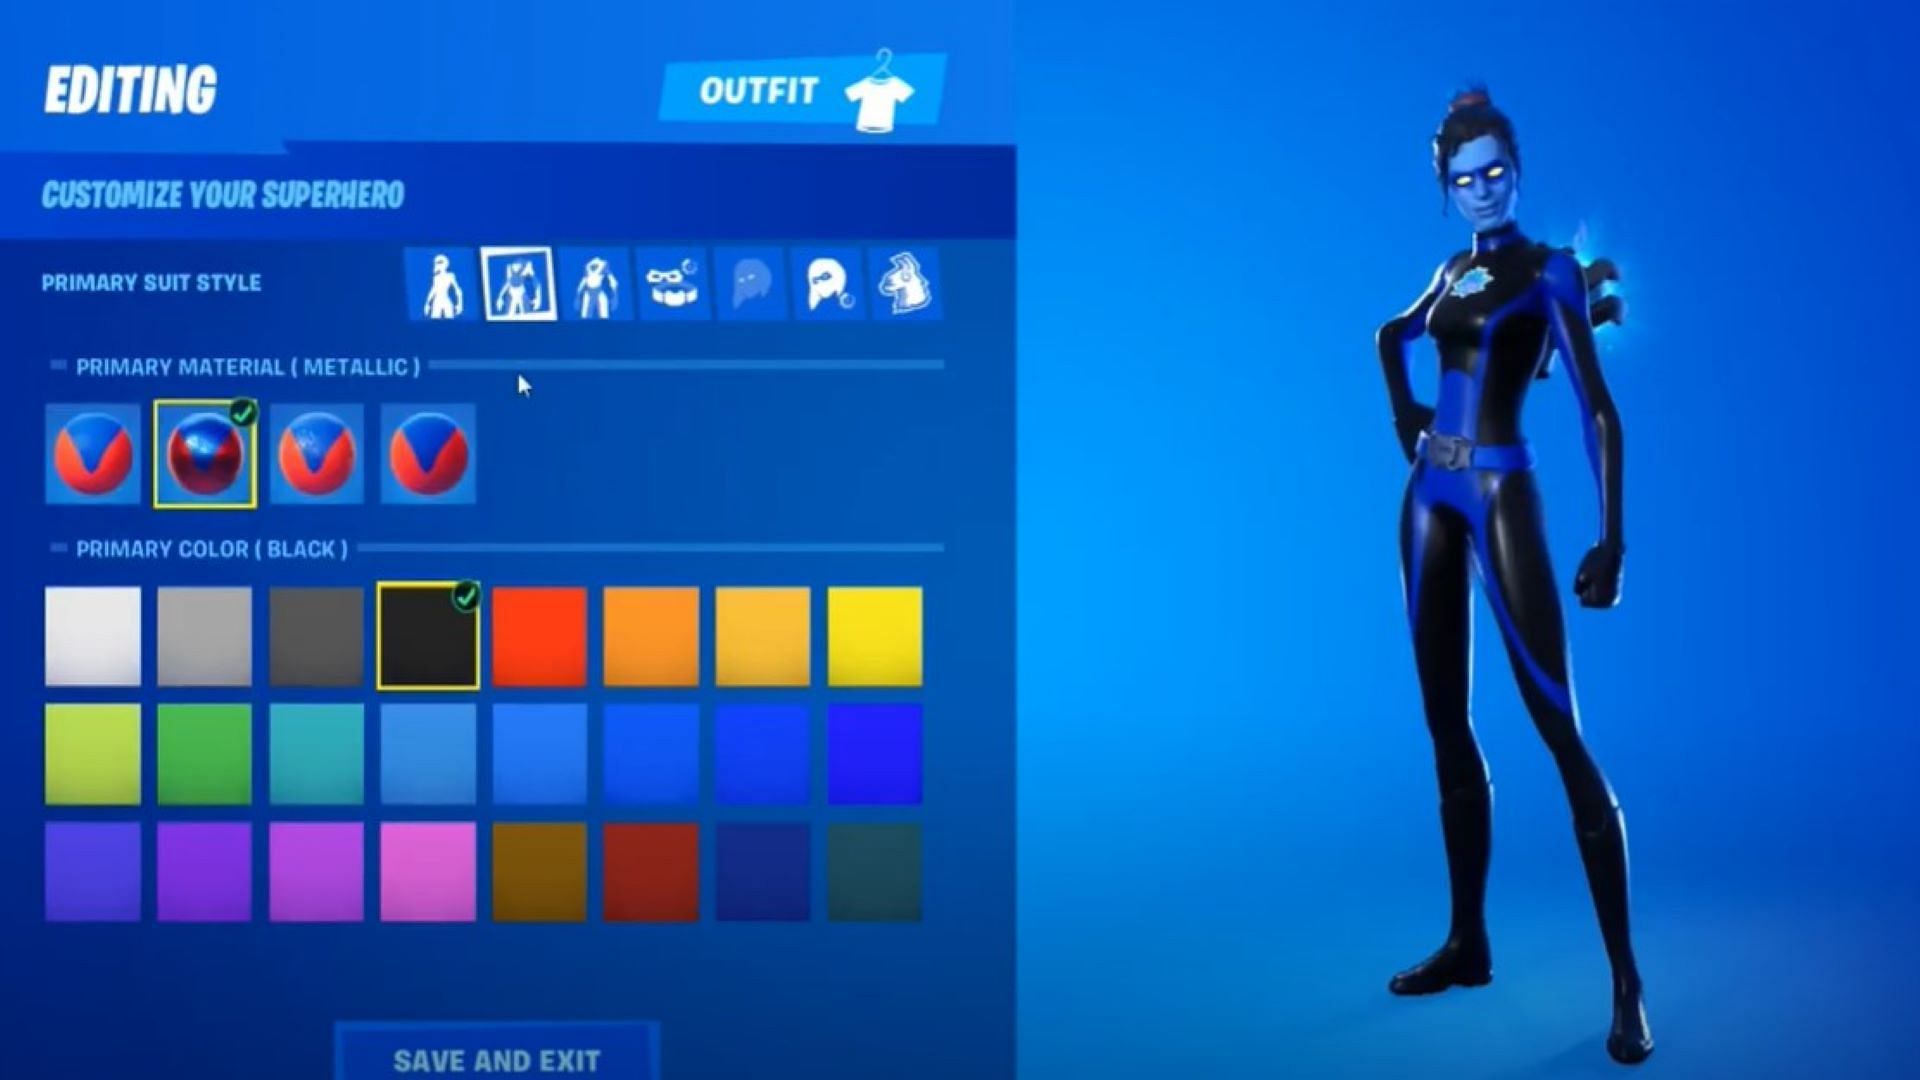 How Much Are The Superhero Skins In Fortnite